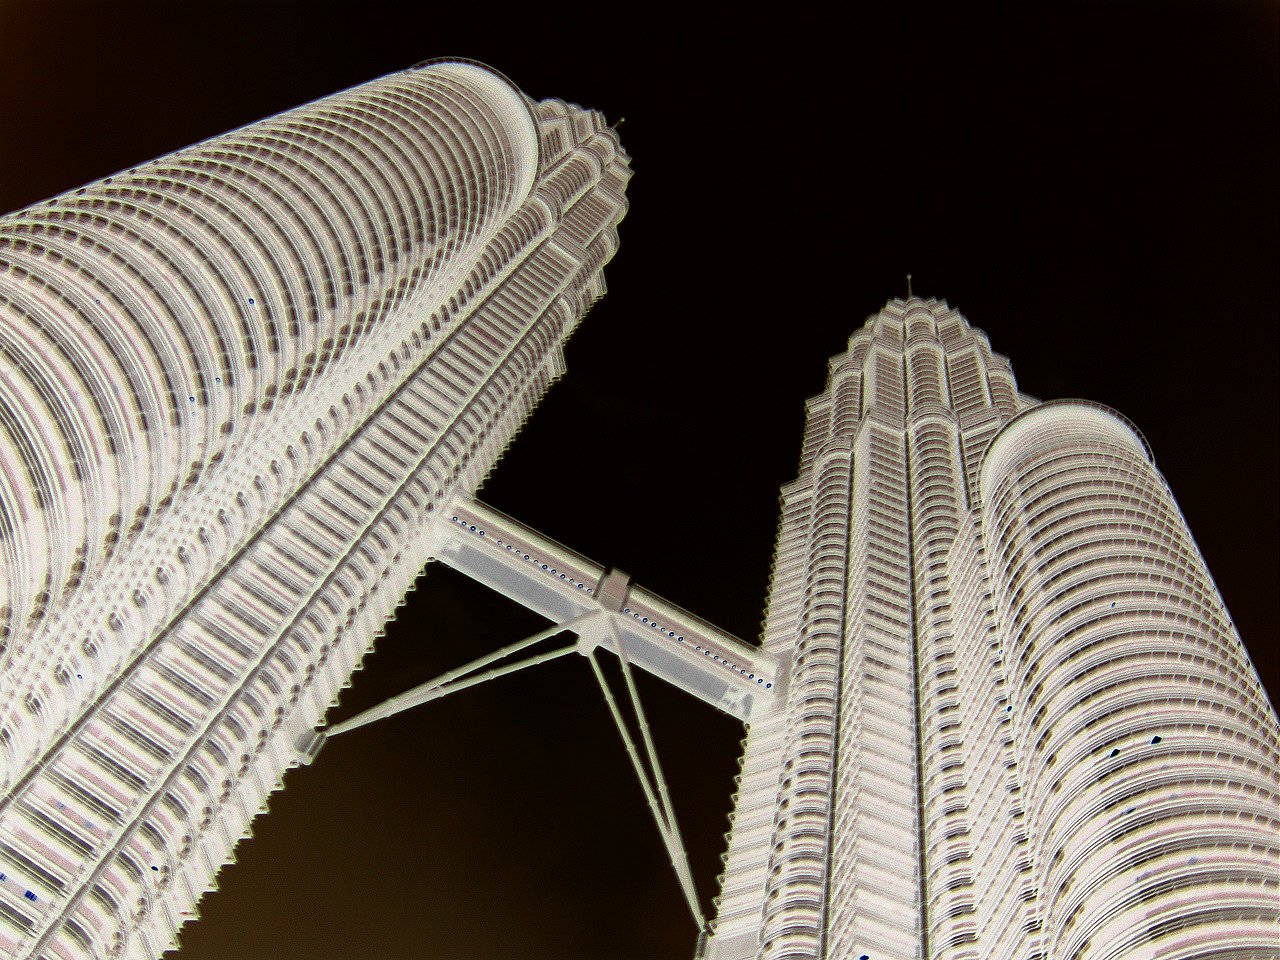 two tall towers that are standing in the air